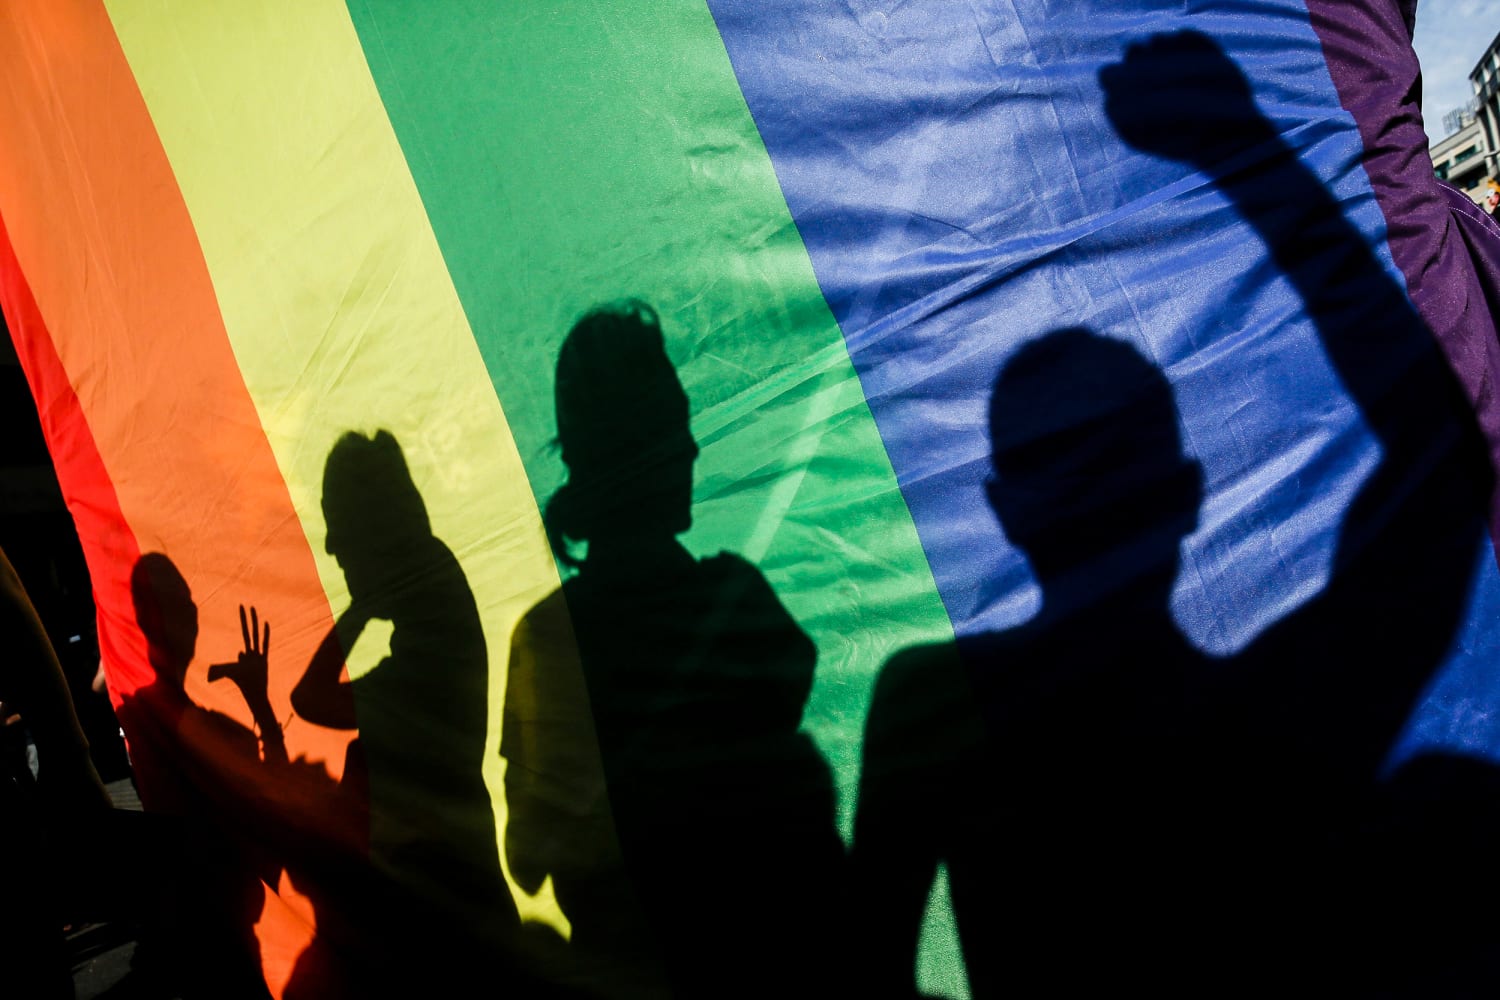 Conversion therapy costs U.S. over $9 billion a year, study finds